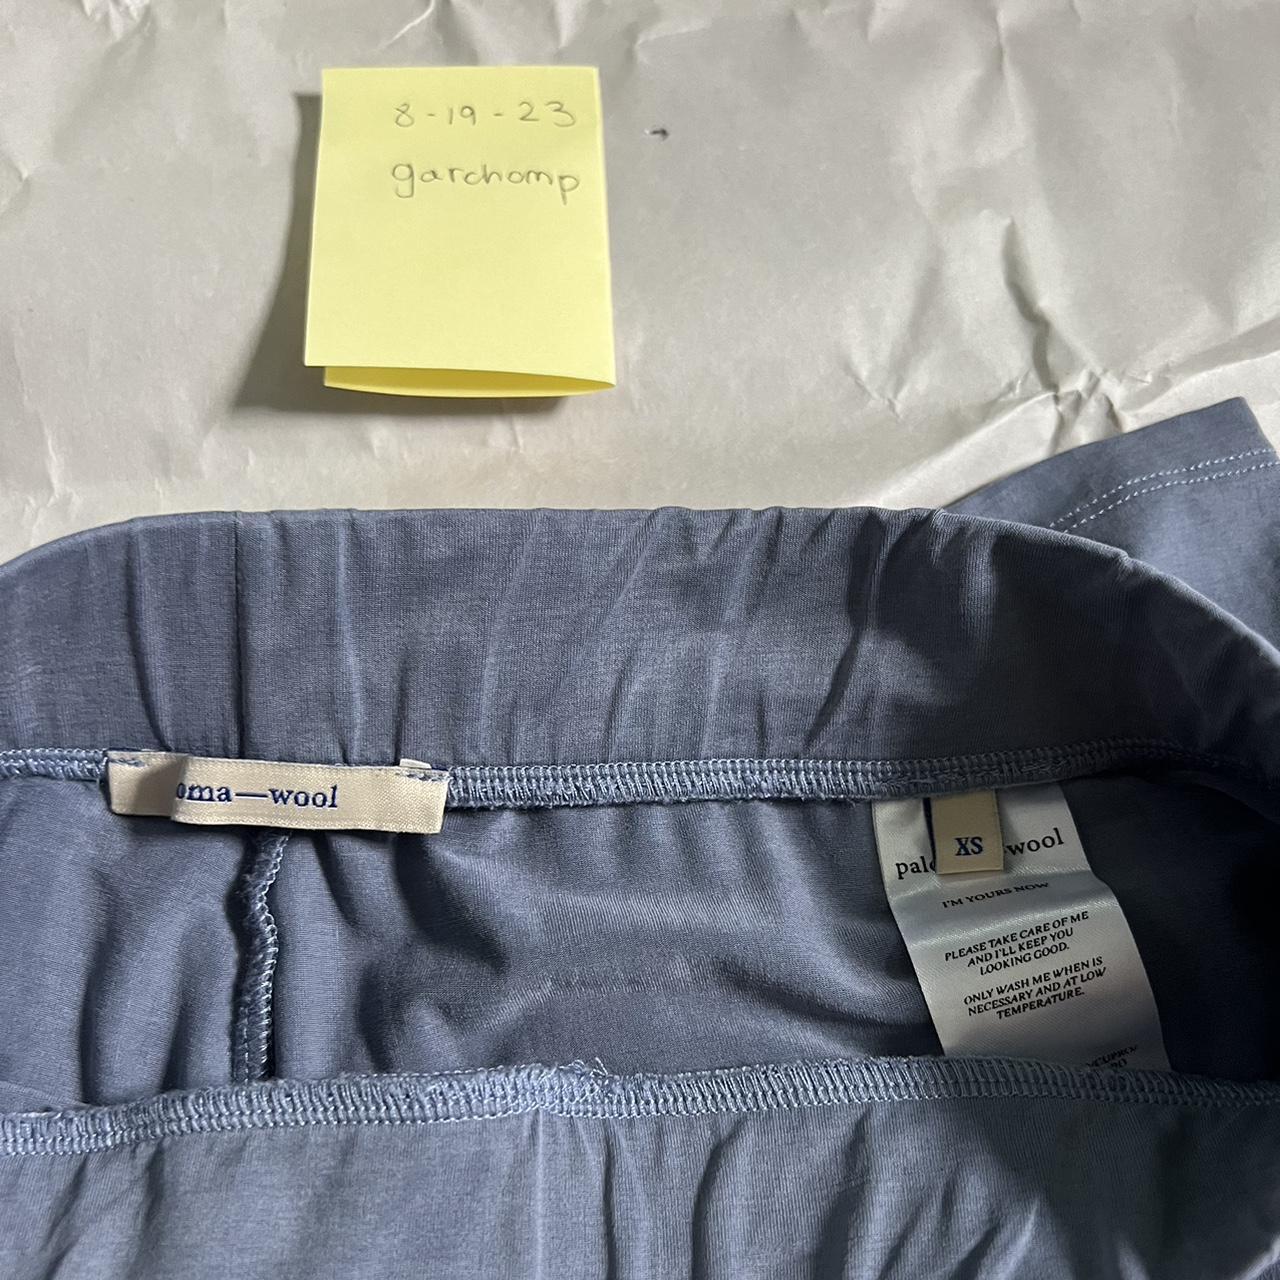 Paloma wool Thomson cupro pants in blue, 8/10 condition - Depop